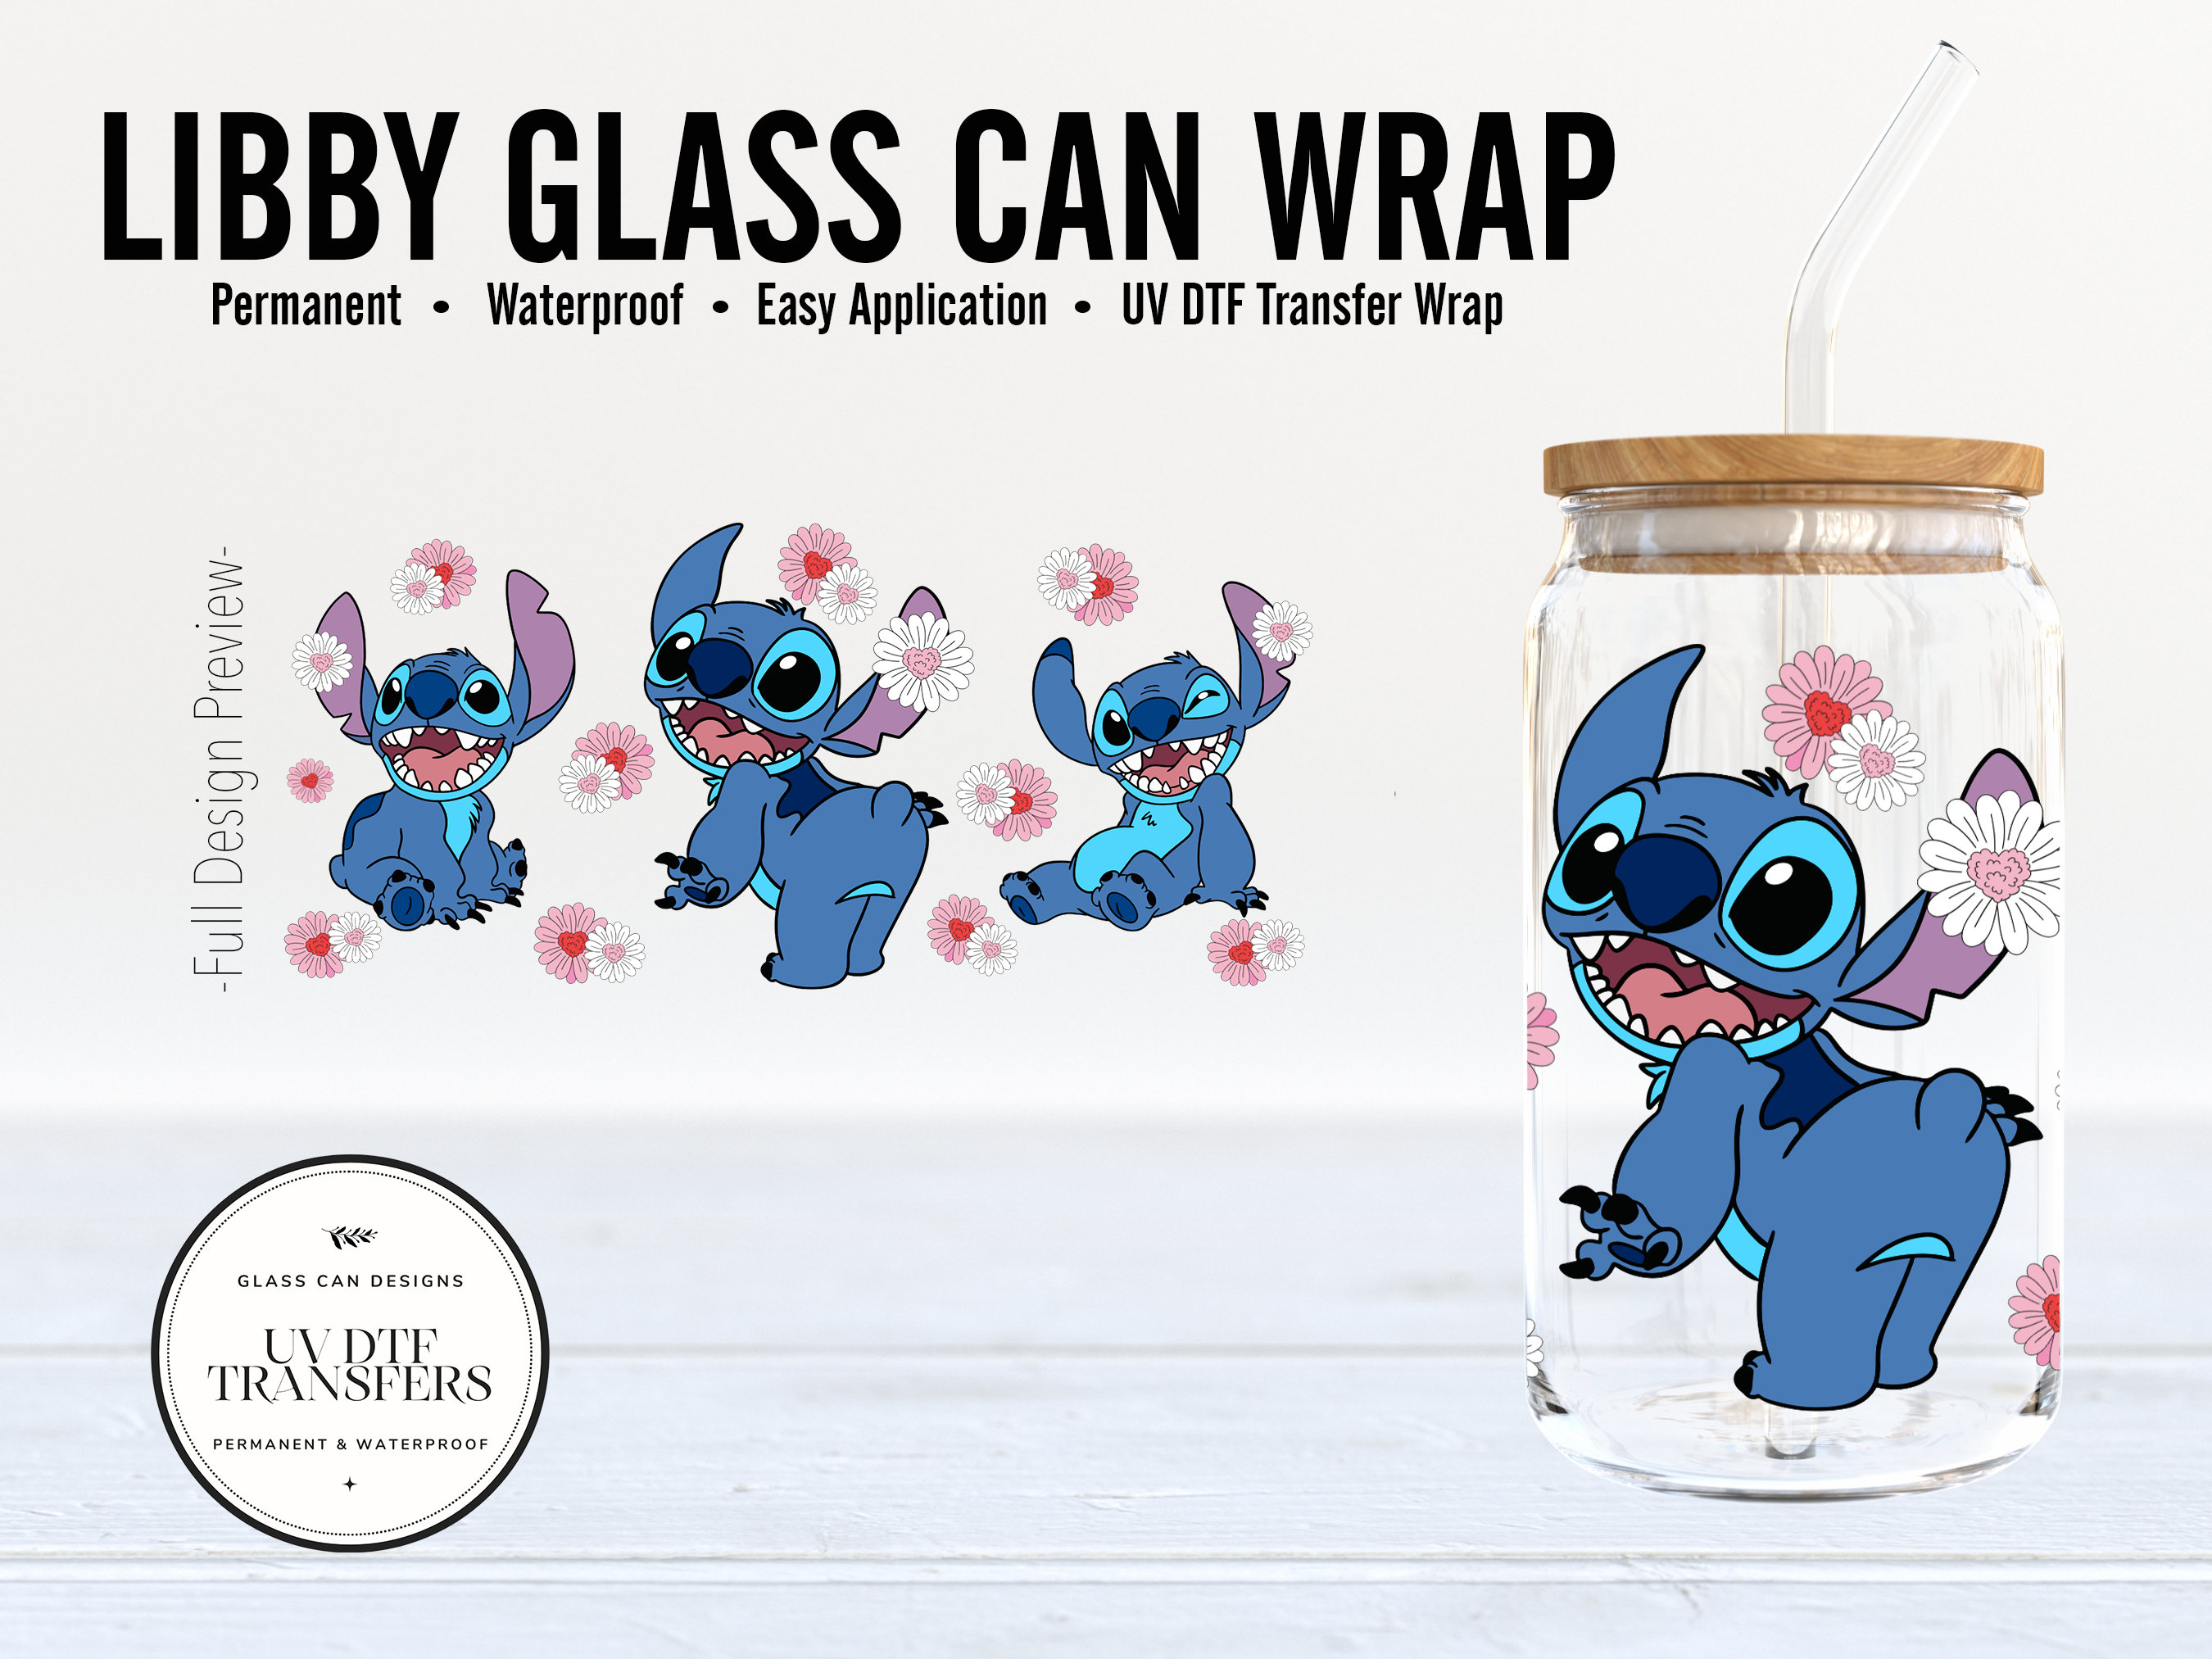 Cant believe i found plastic libby cups. #uvwraps #uvdtf